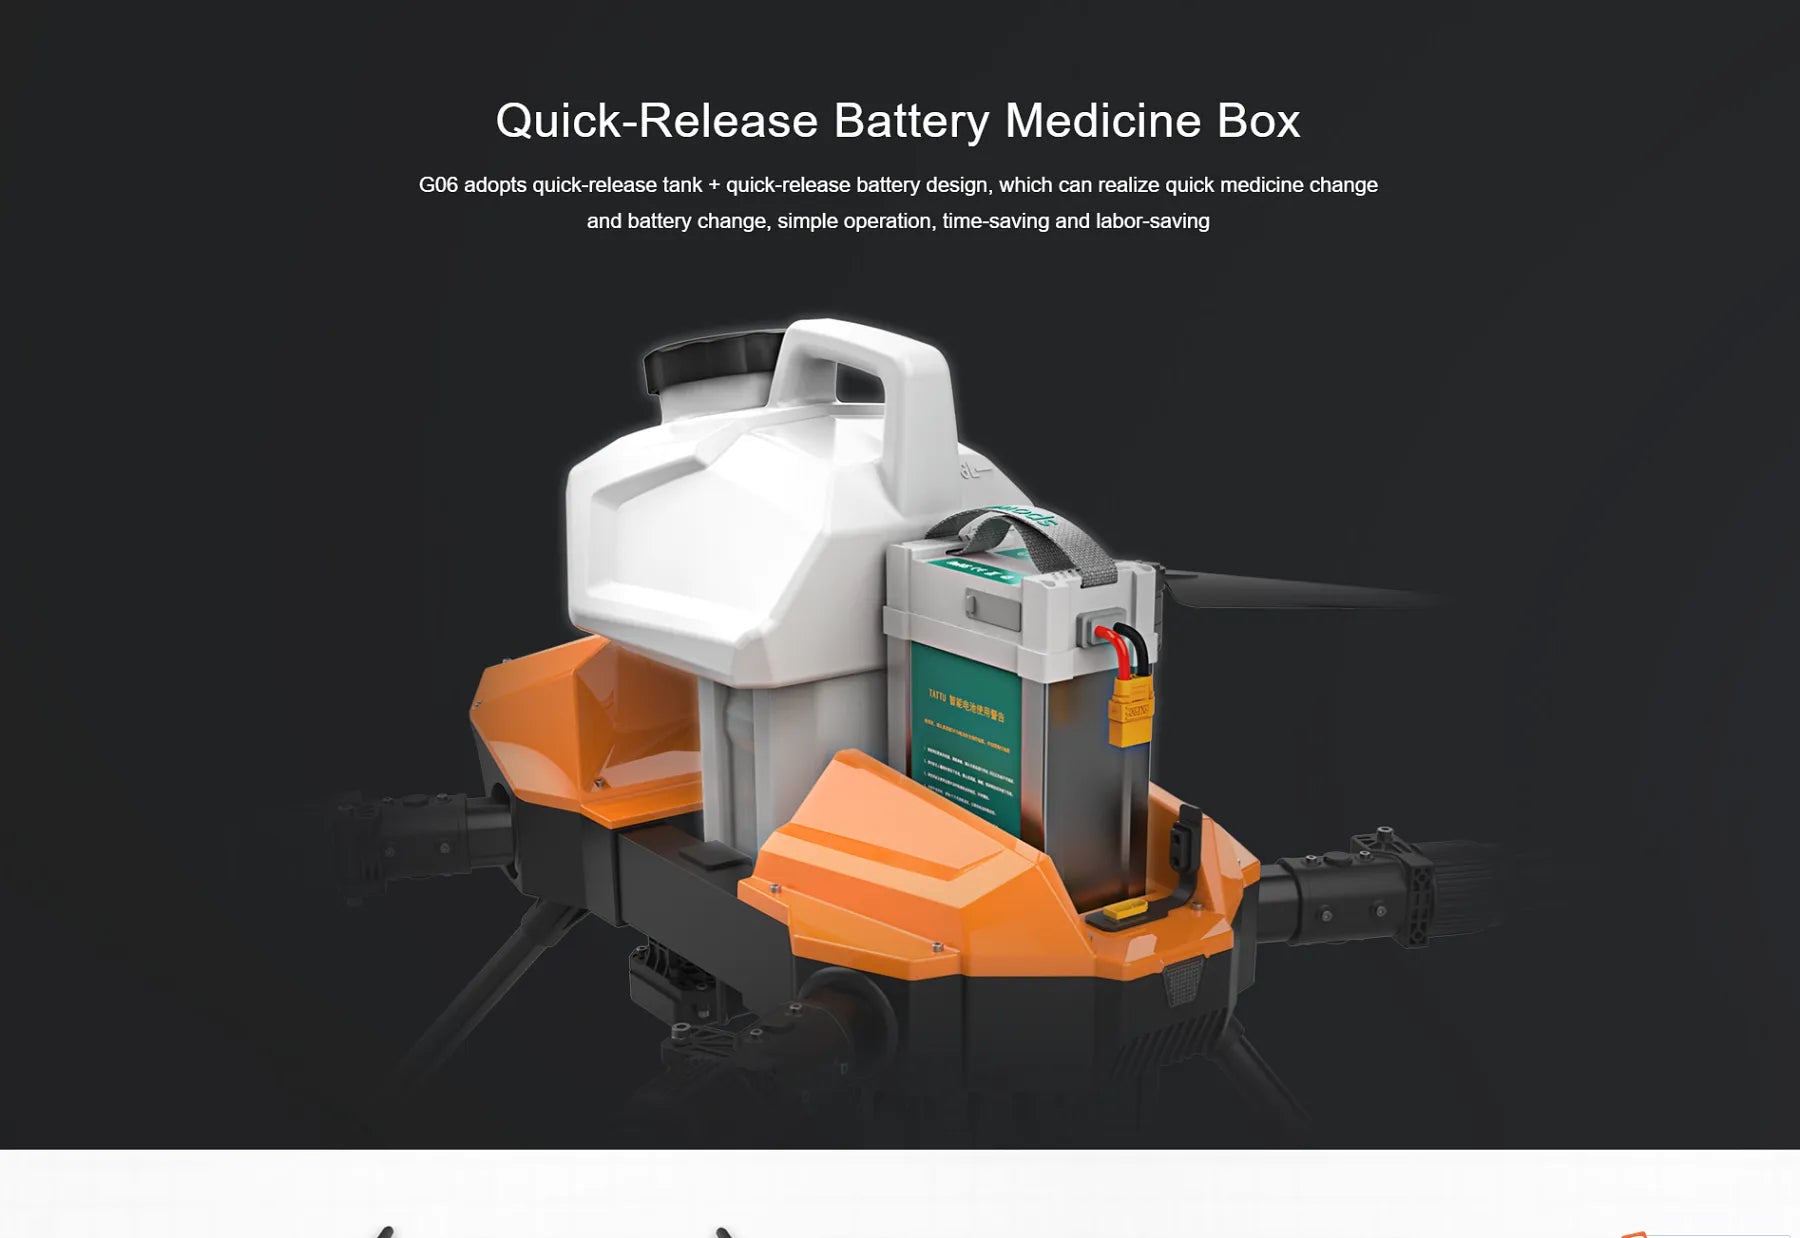 EFT G06 V2, quick-release battery medicine box GO6 can realize quick medicine change and battery change .